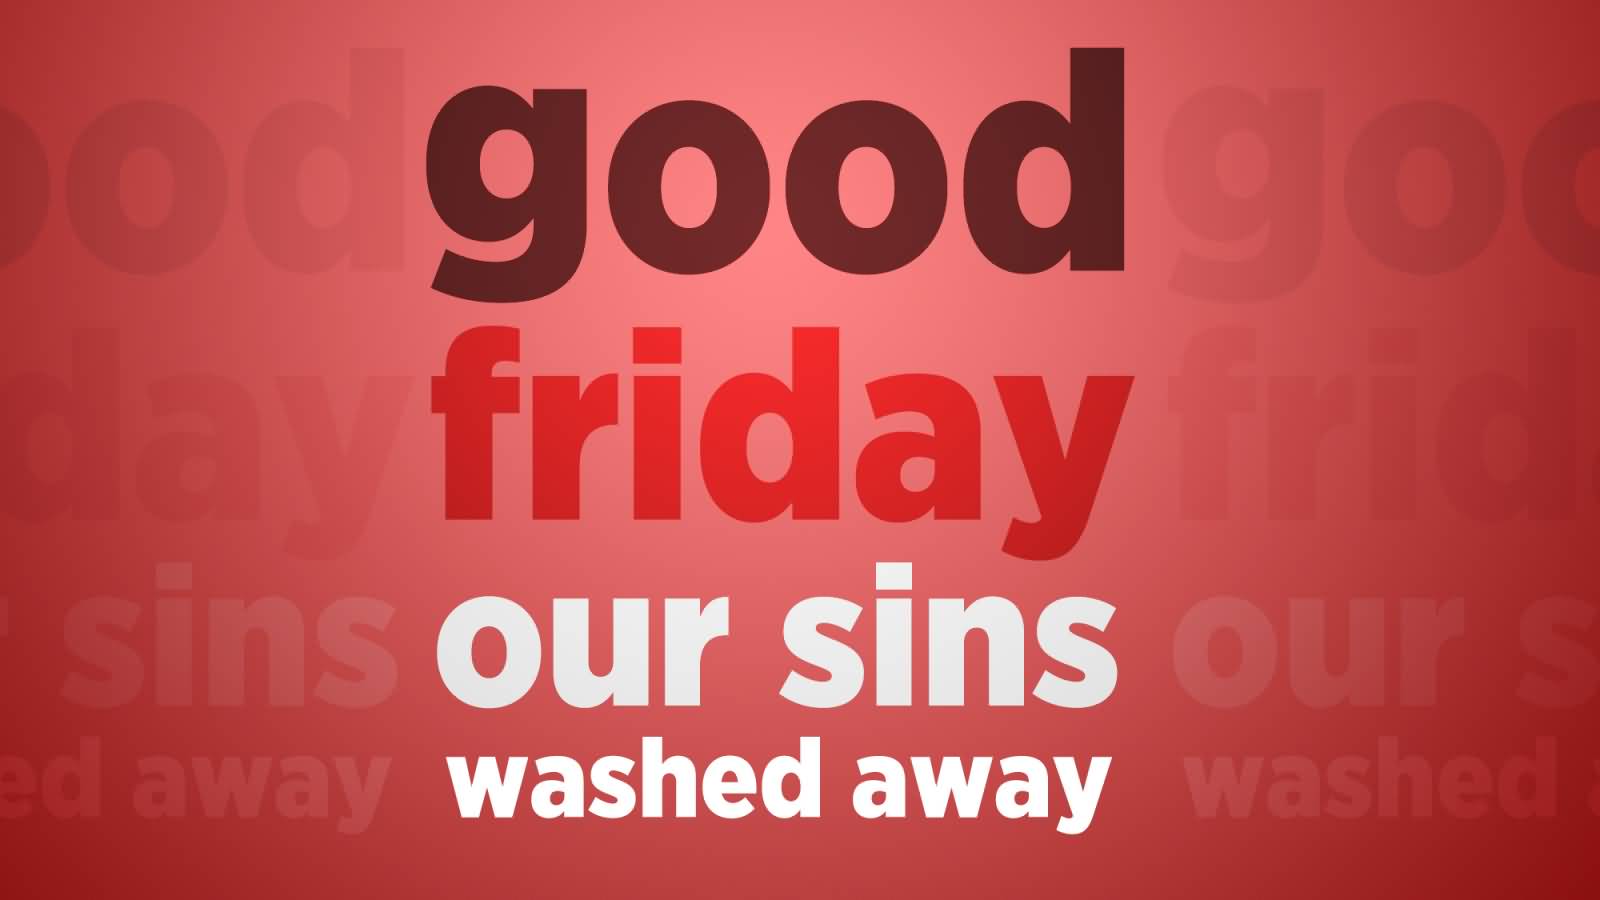 Good Friday Our Sins Washed Away